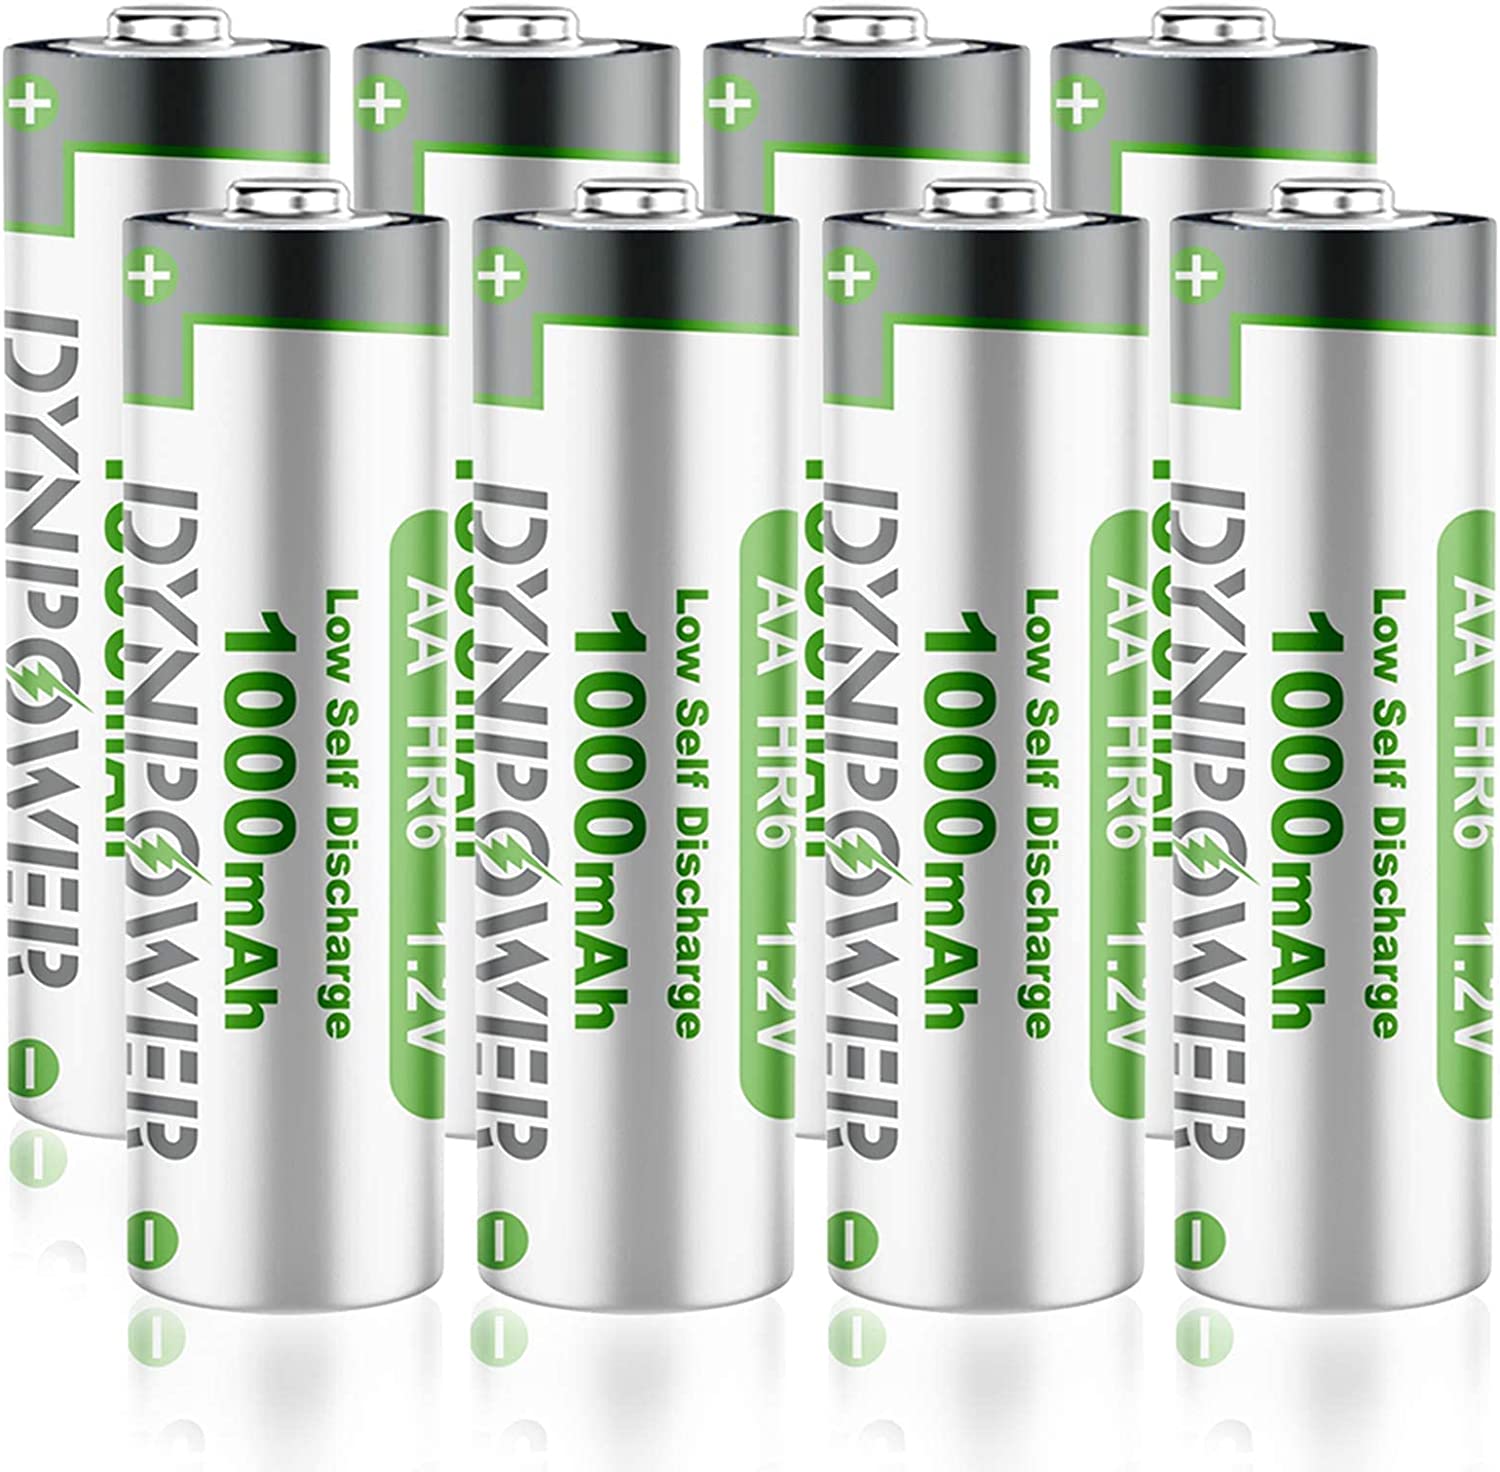 Dynpower Recyclable NiMH Rechargeable AA Batteries, 8-Pack